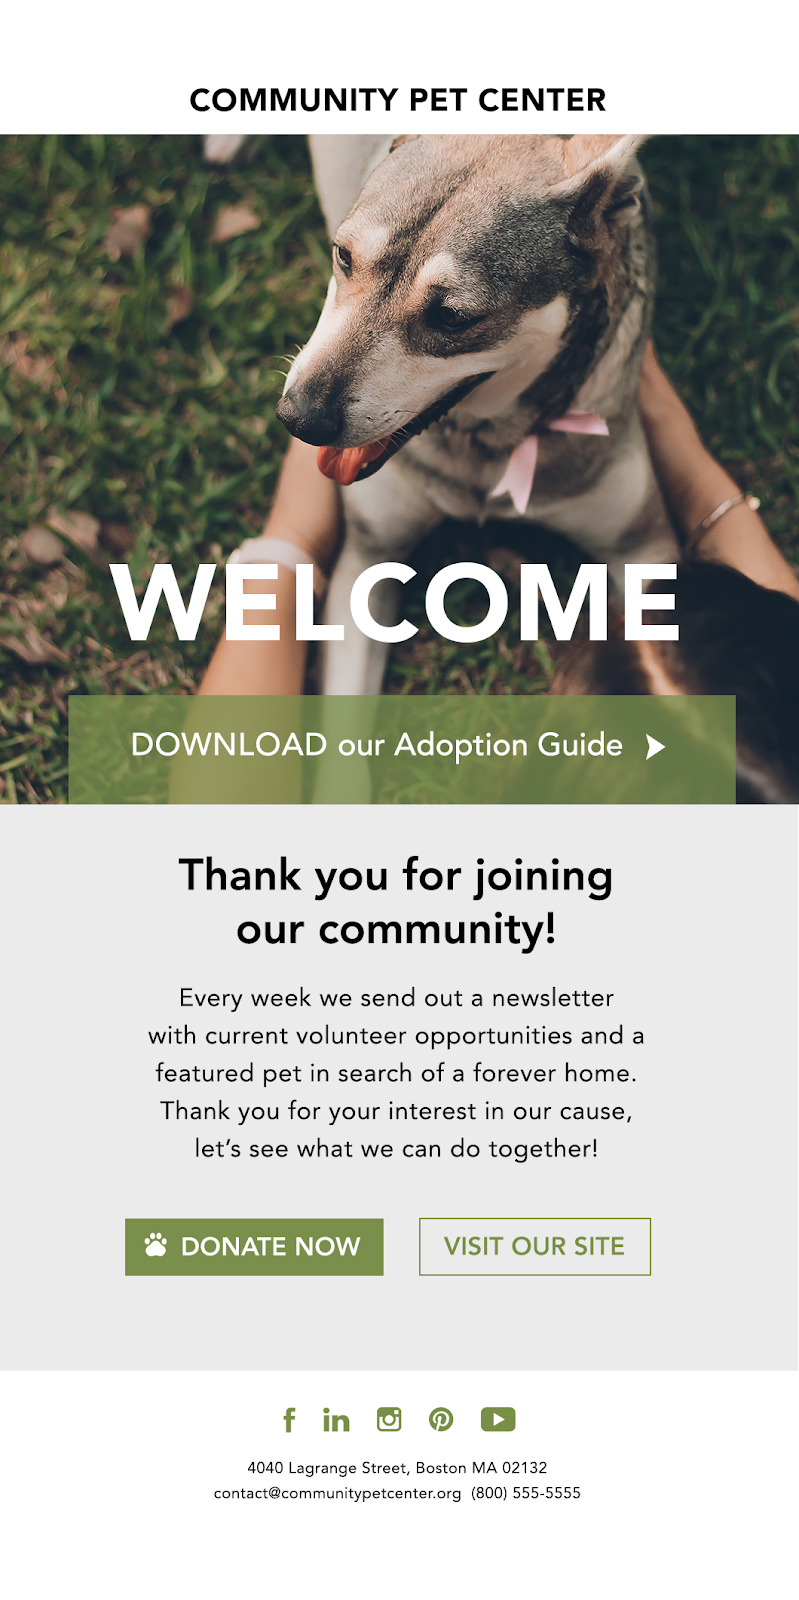 Marketing Automation for Nonprofits - welcome email